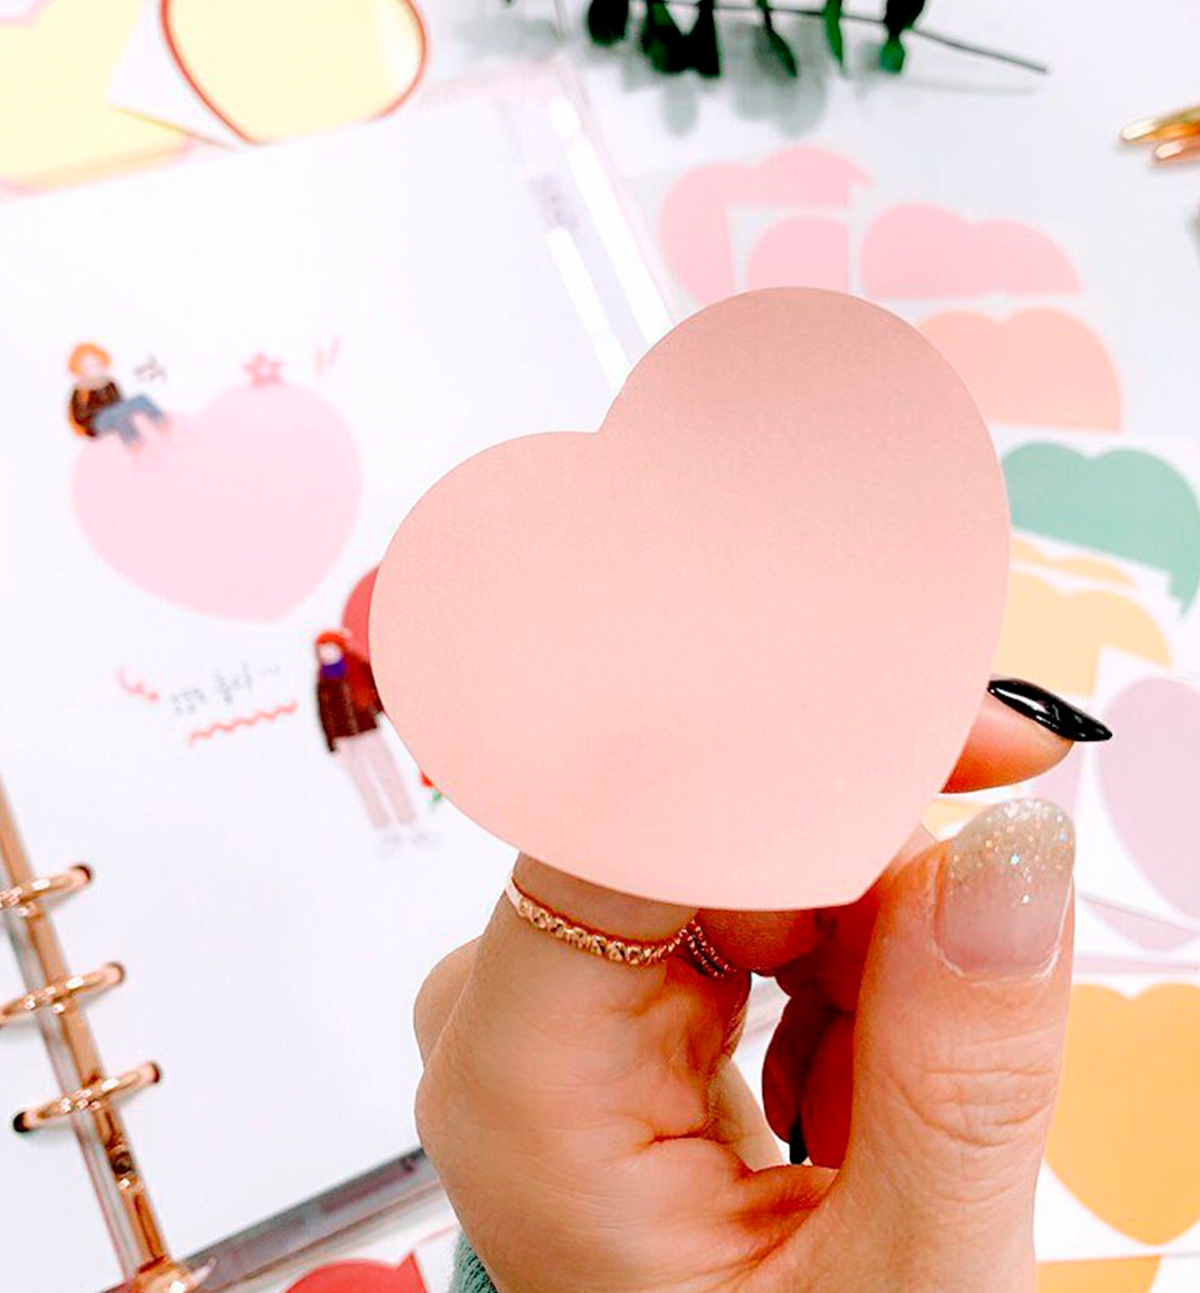 Colorful Heart Sticker [59x53mm]